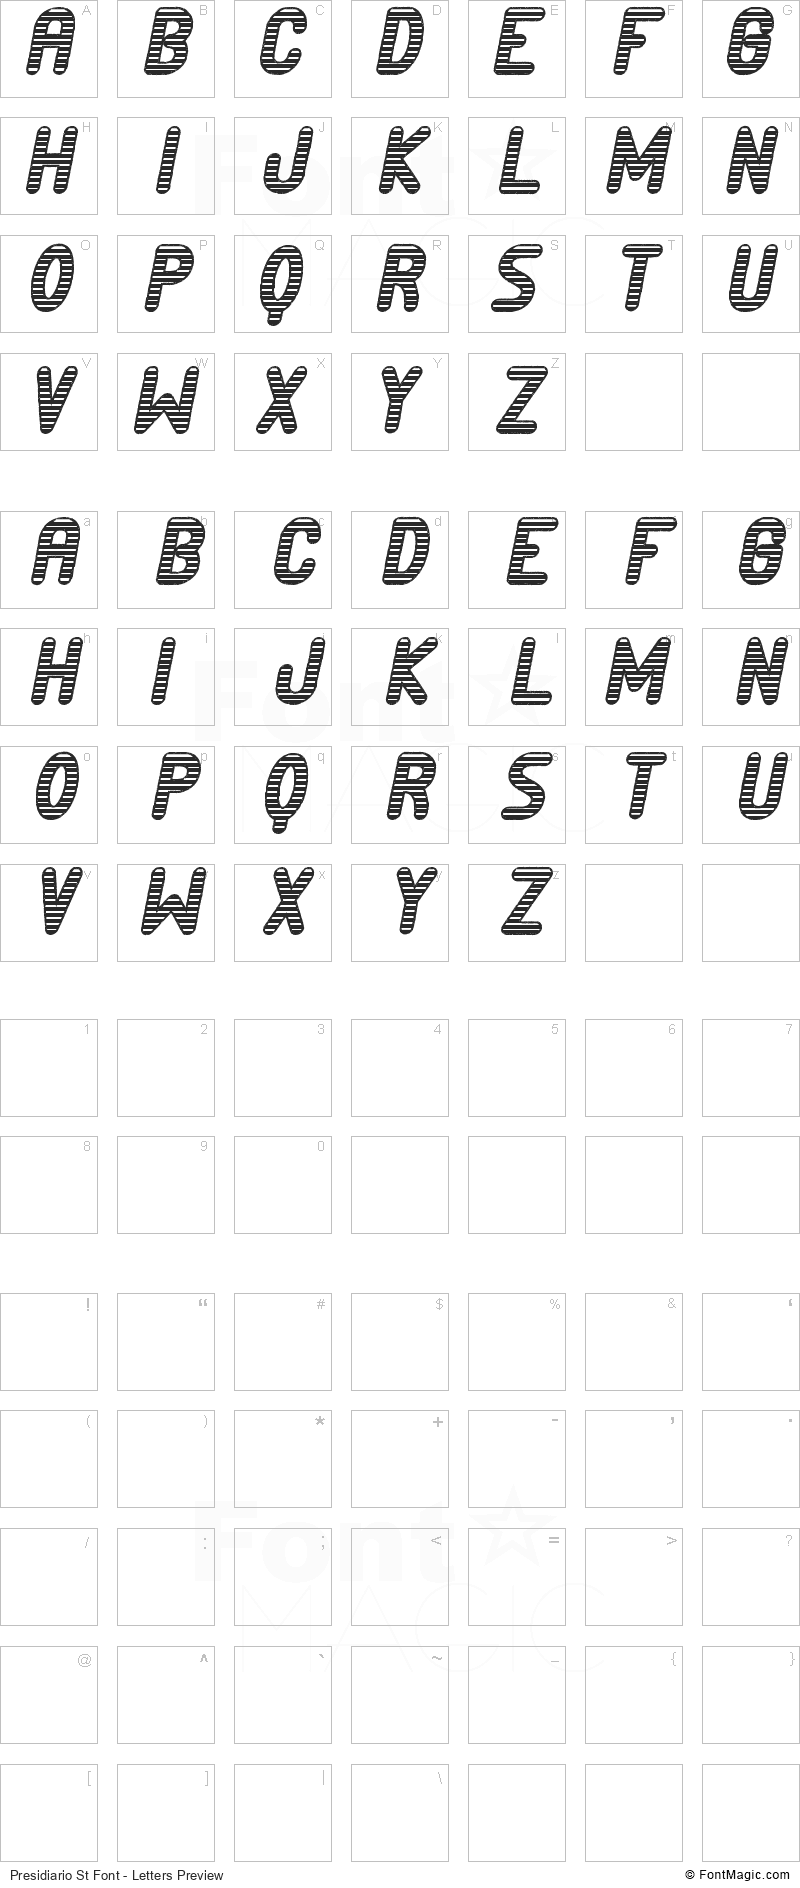 Presidiario St Font - All Latters Preview Chart